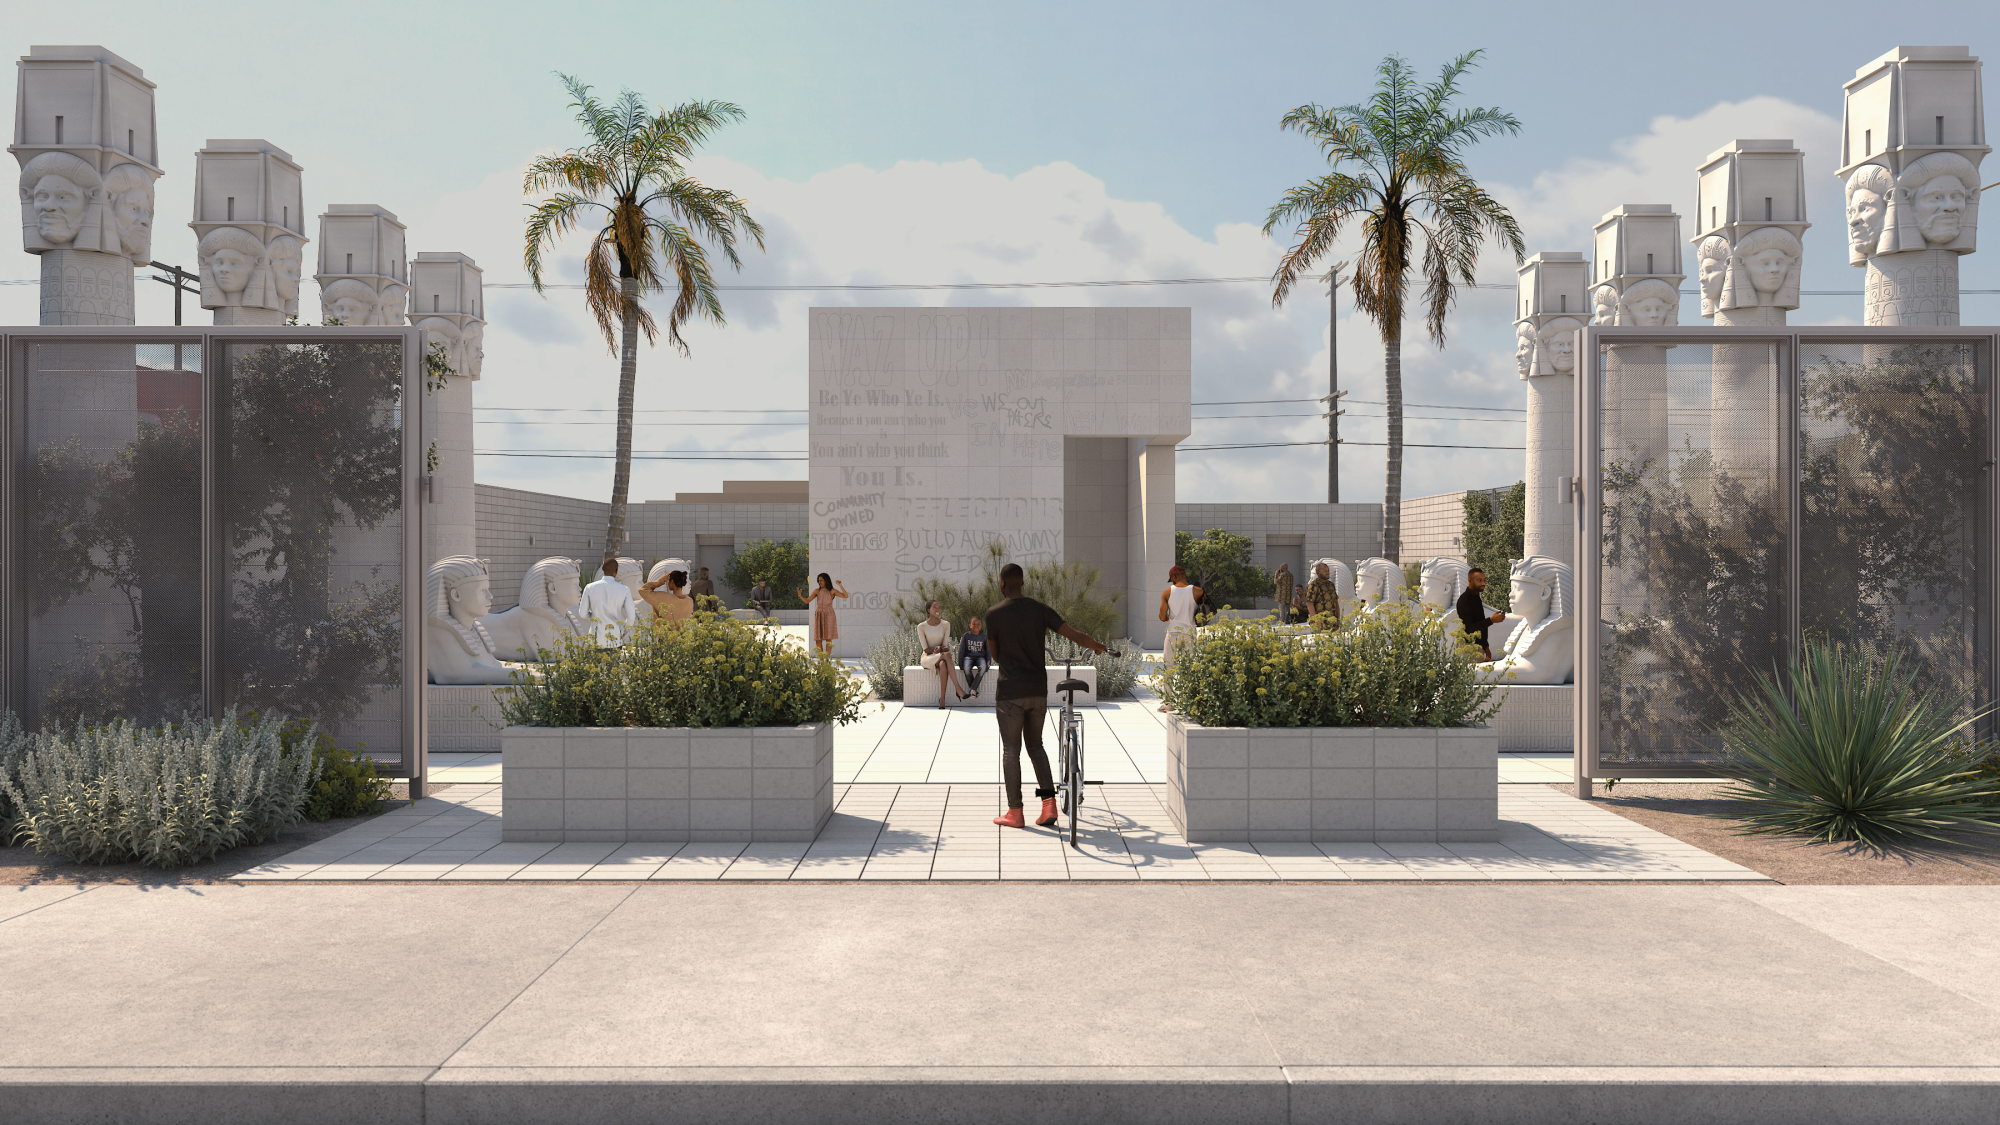 A rendering of a sculpture park with columns.